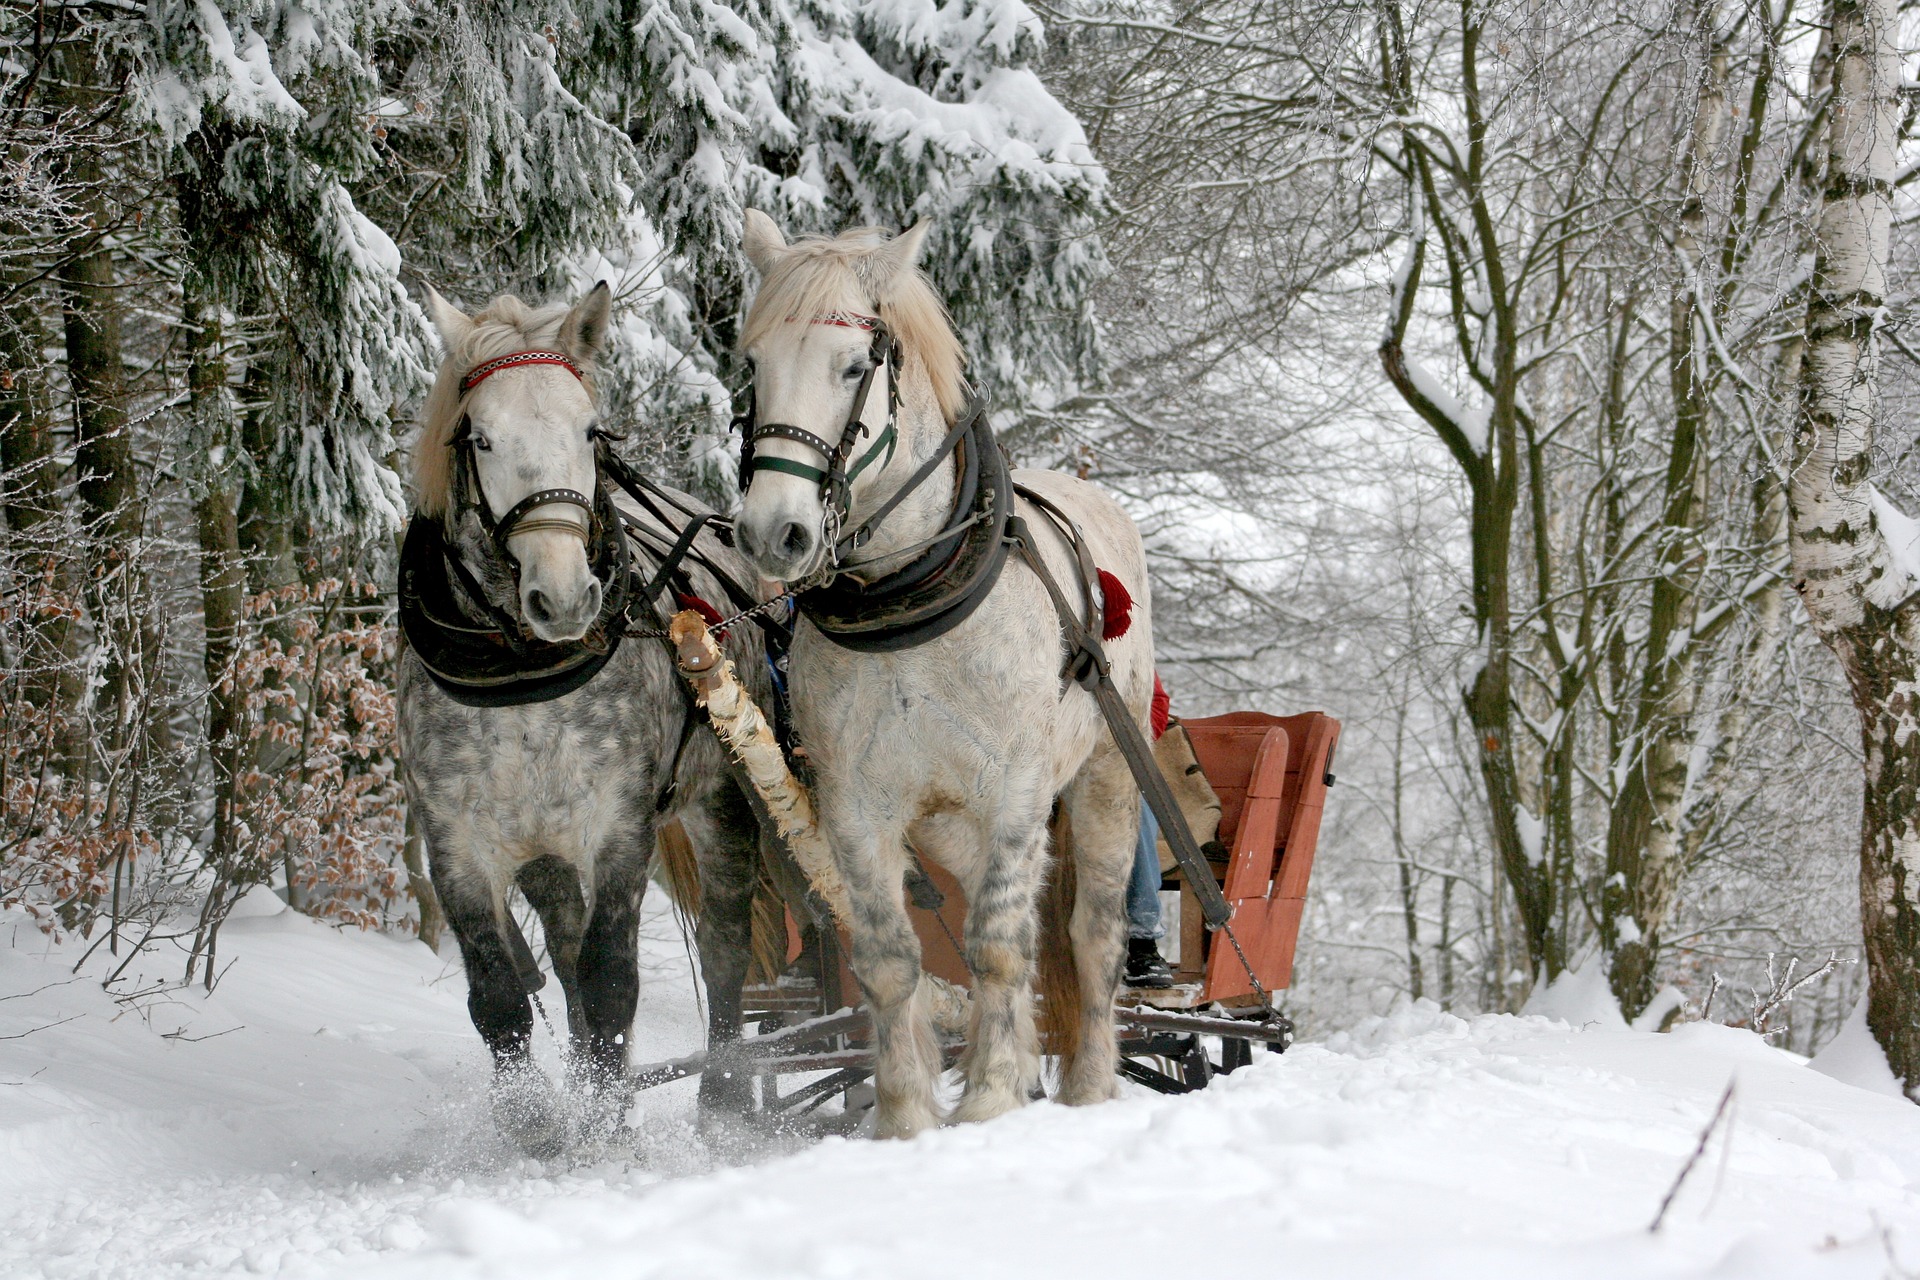 Two white horses pulling a sleigh through a snowy forest